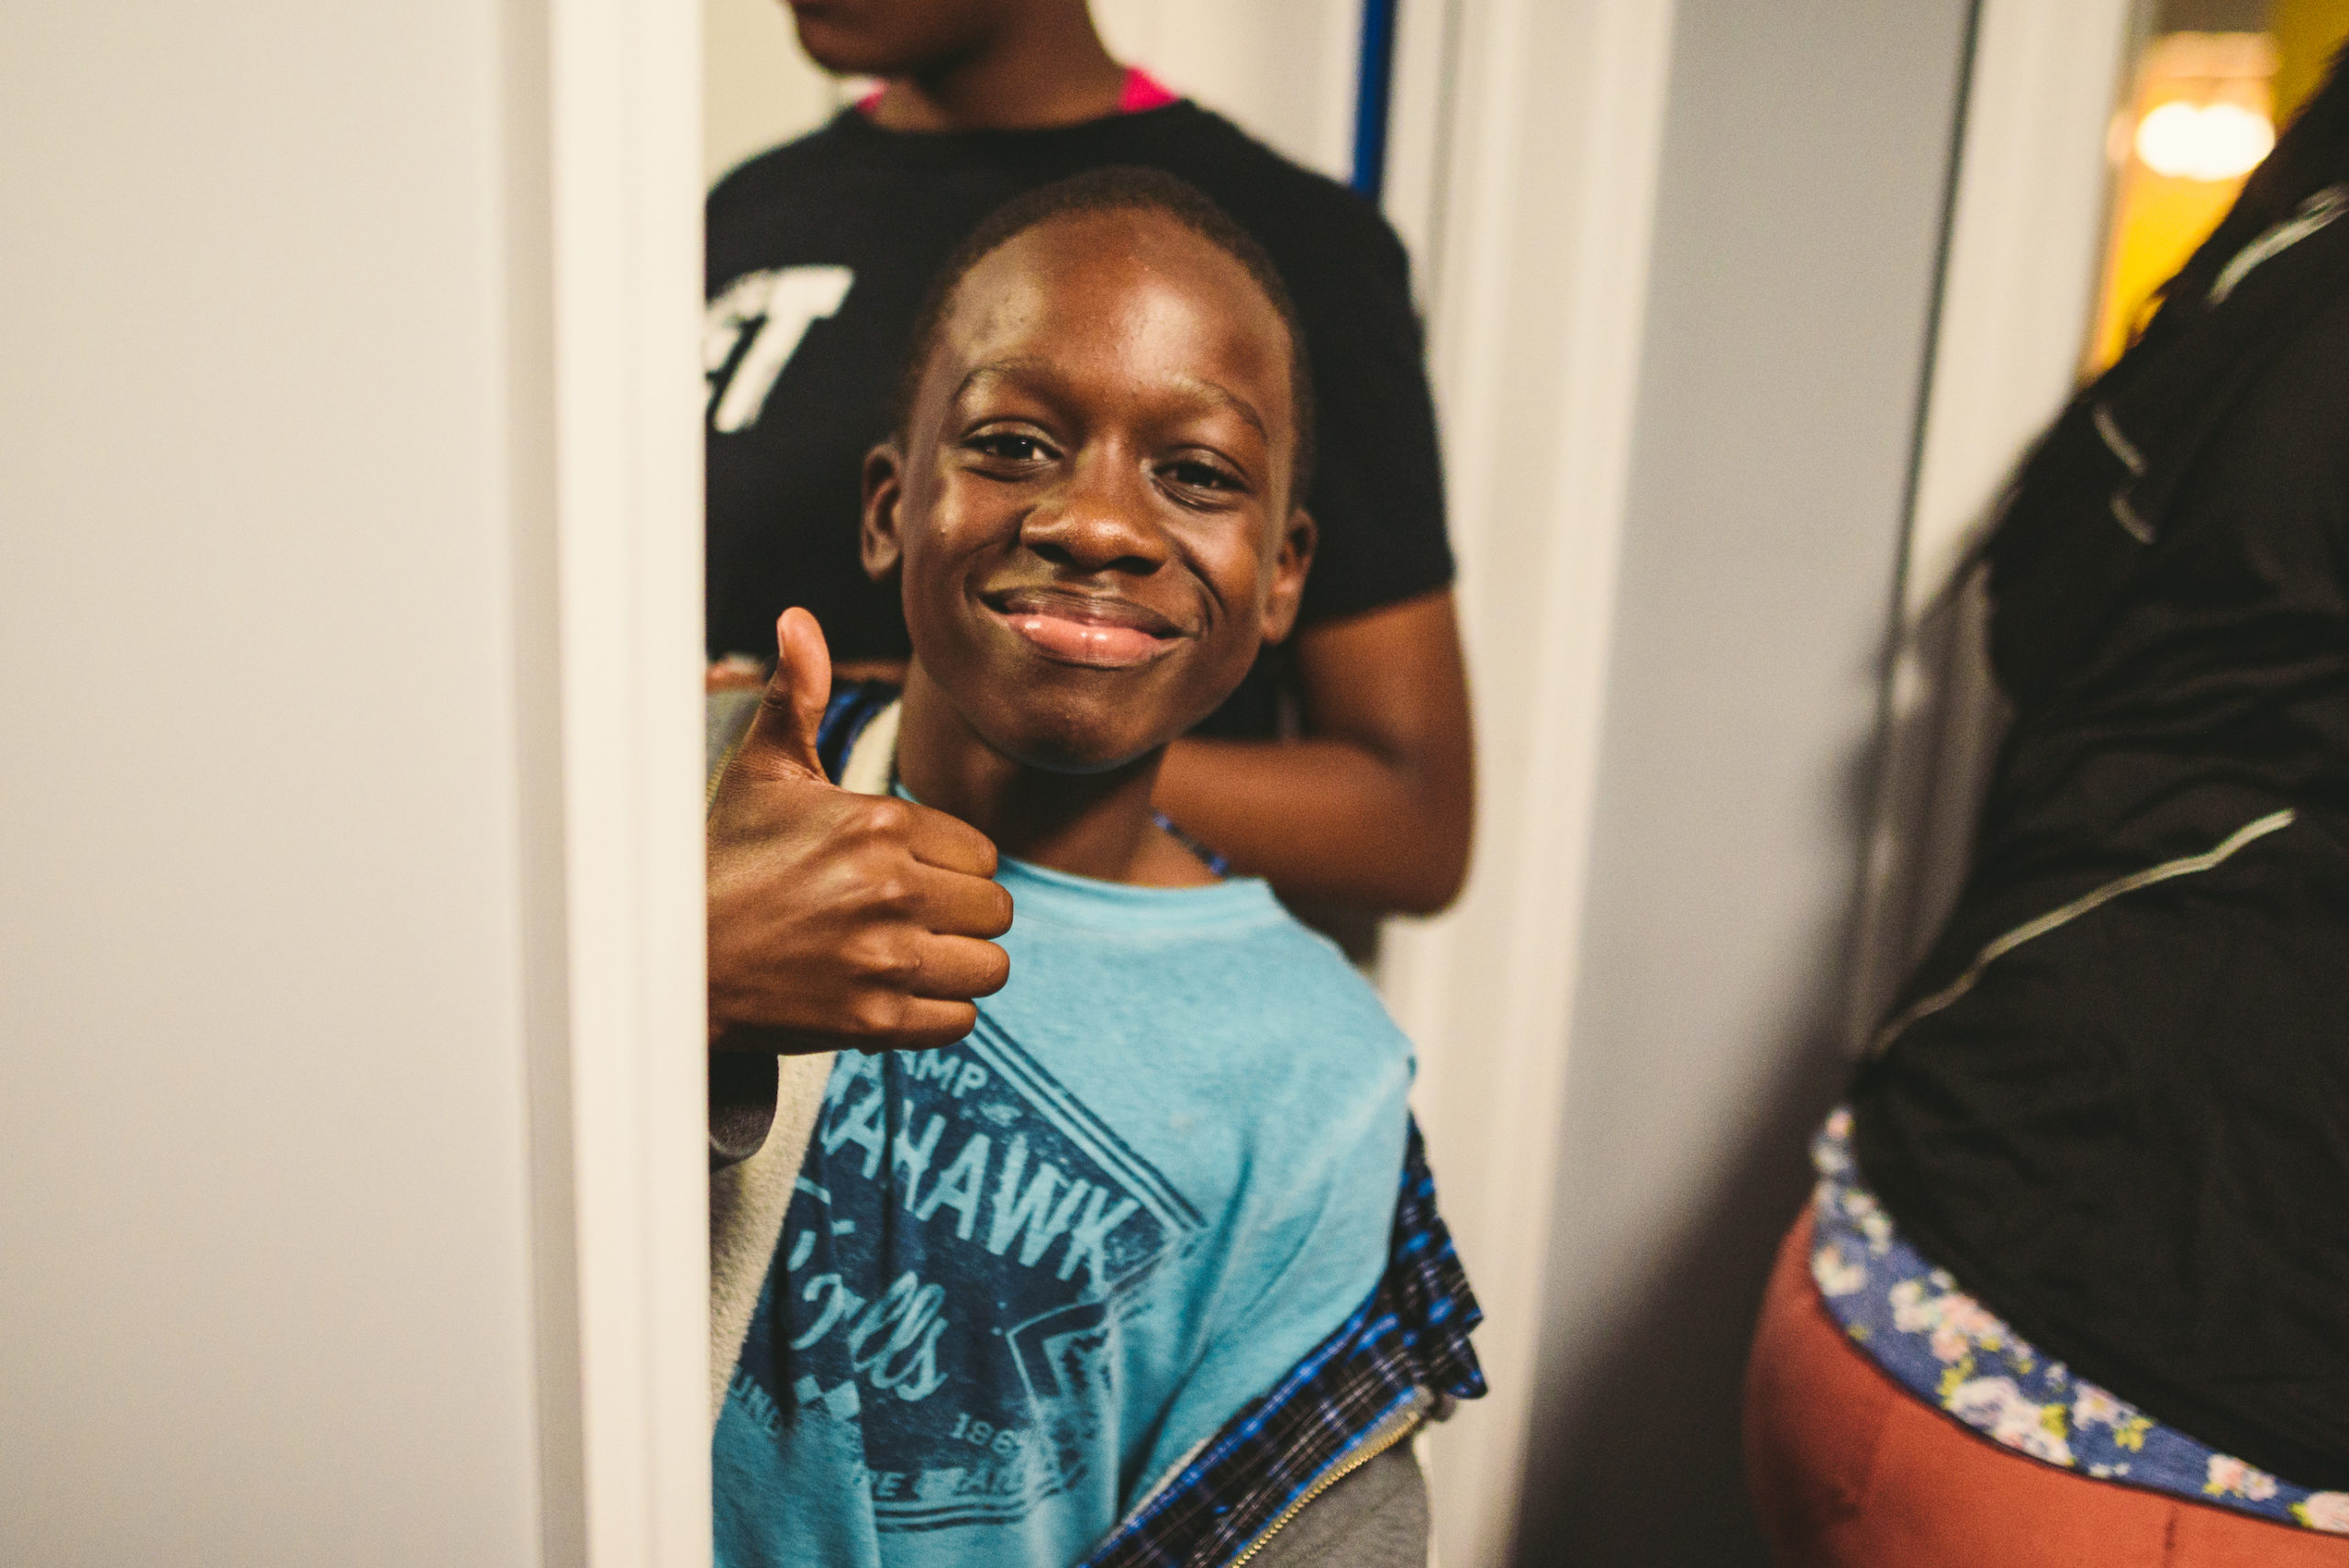 Handy Nonprofit African American boy wearing a light blue shirt with logo giving a thumbs up and smiling surrounded by people